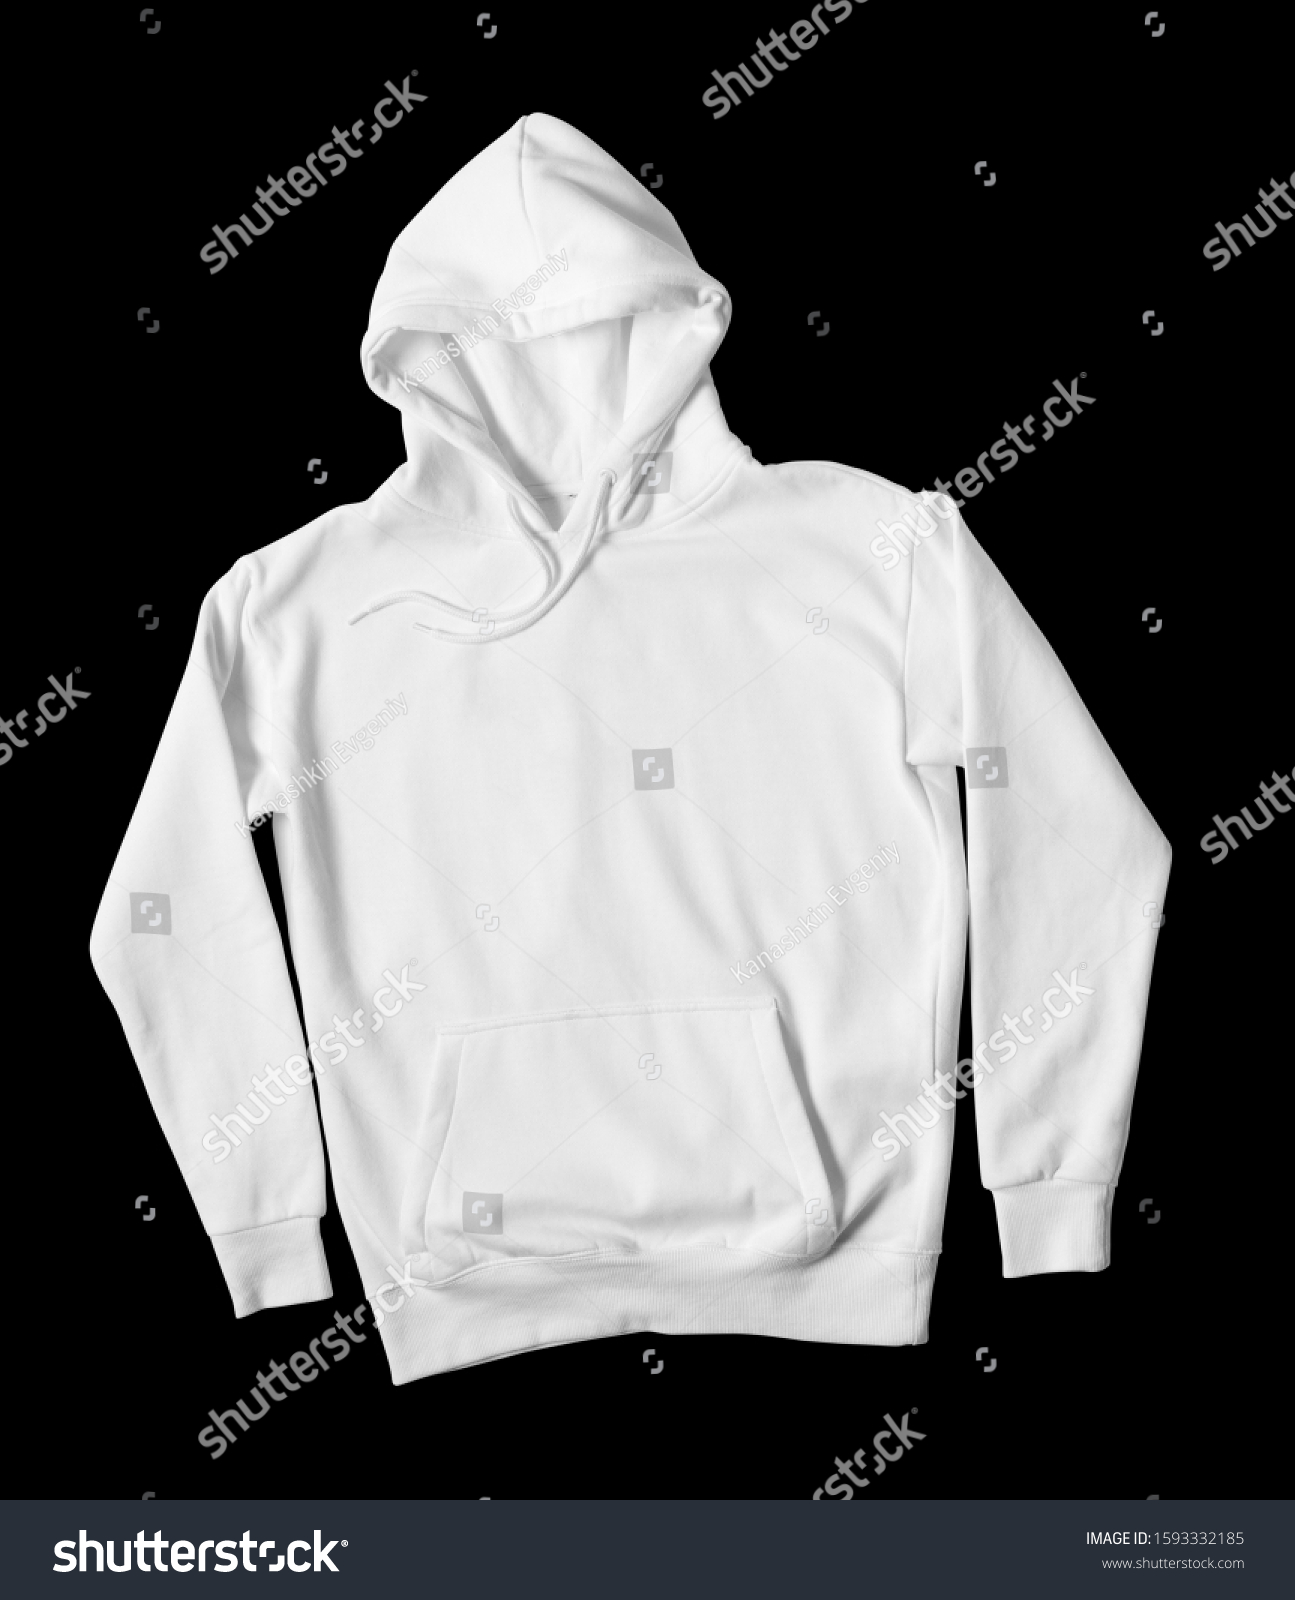 79 White hoodie png Images, Stock Photos & Vectors | Shutterstock